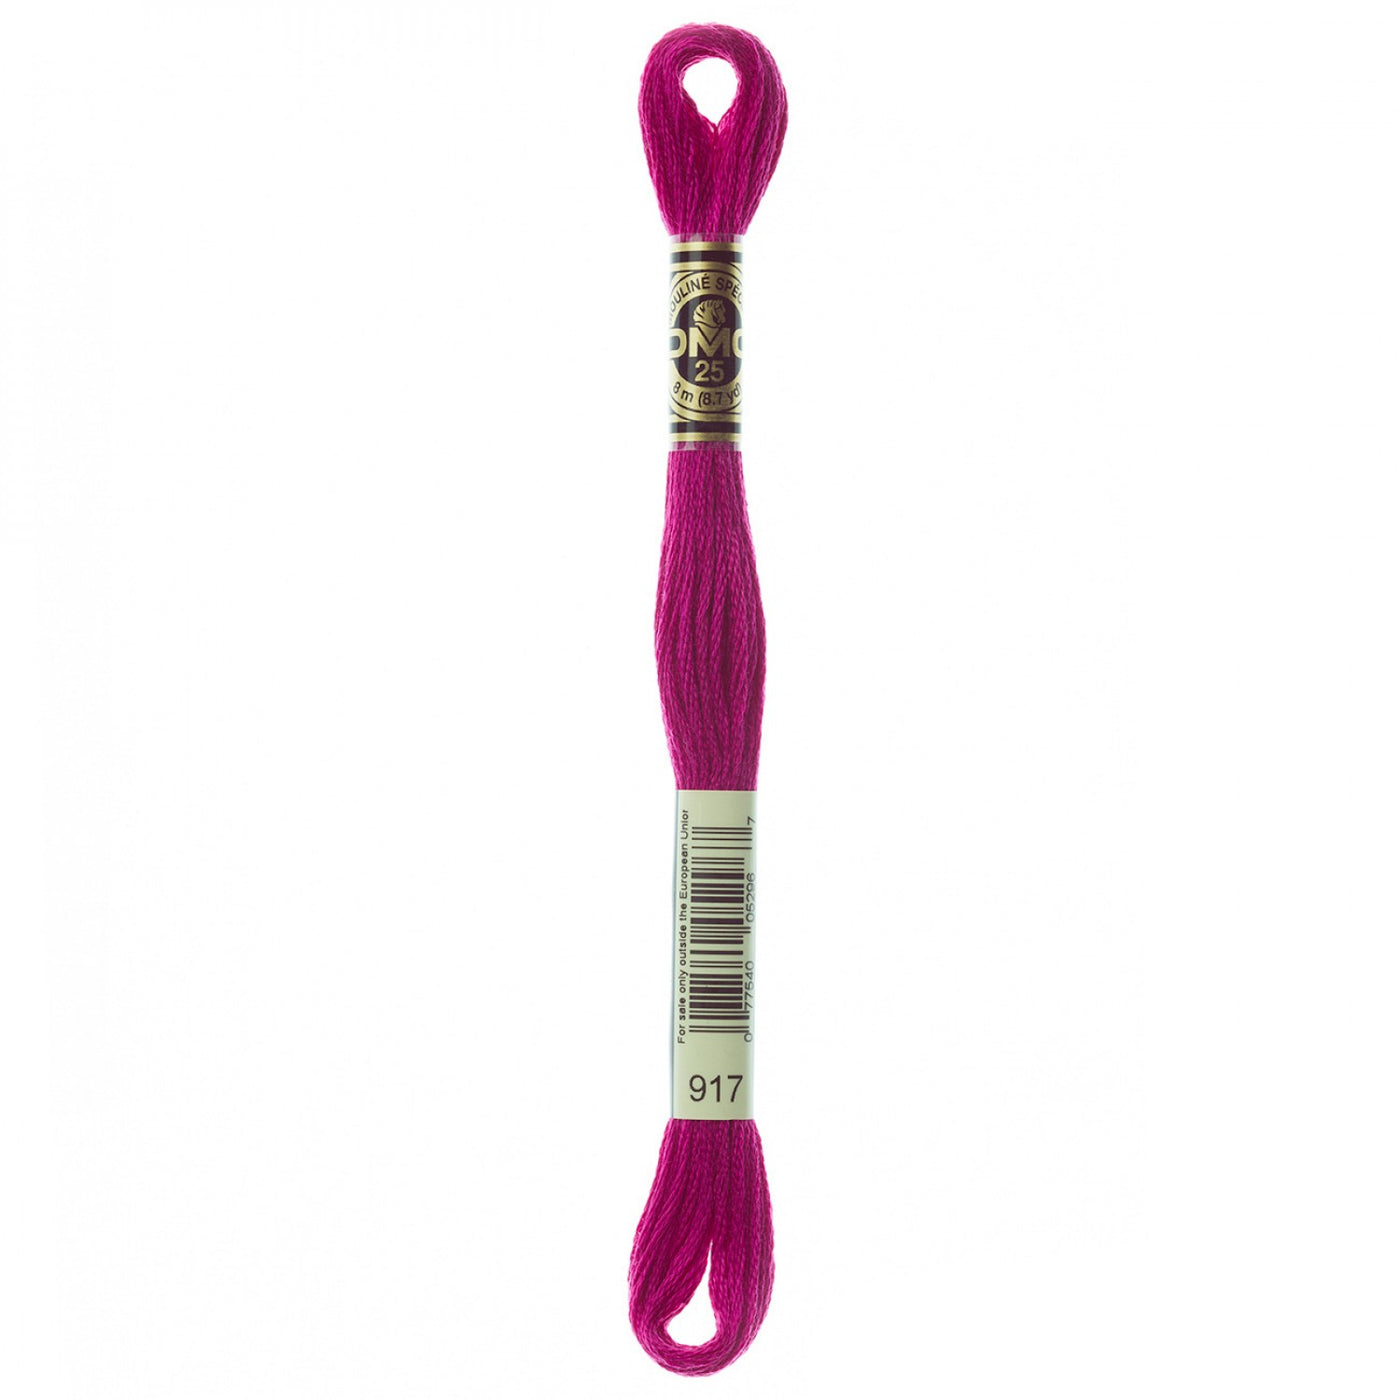 6-Strand Embroidery Floss 917 Med Plum (4922208747565)